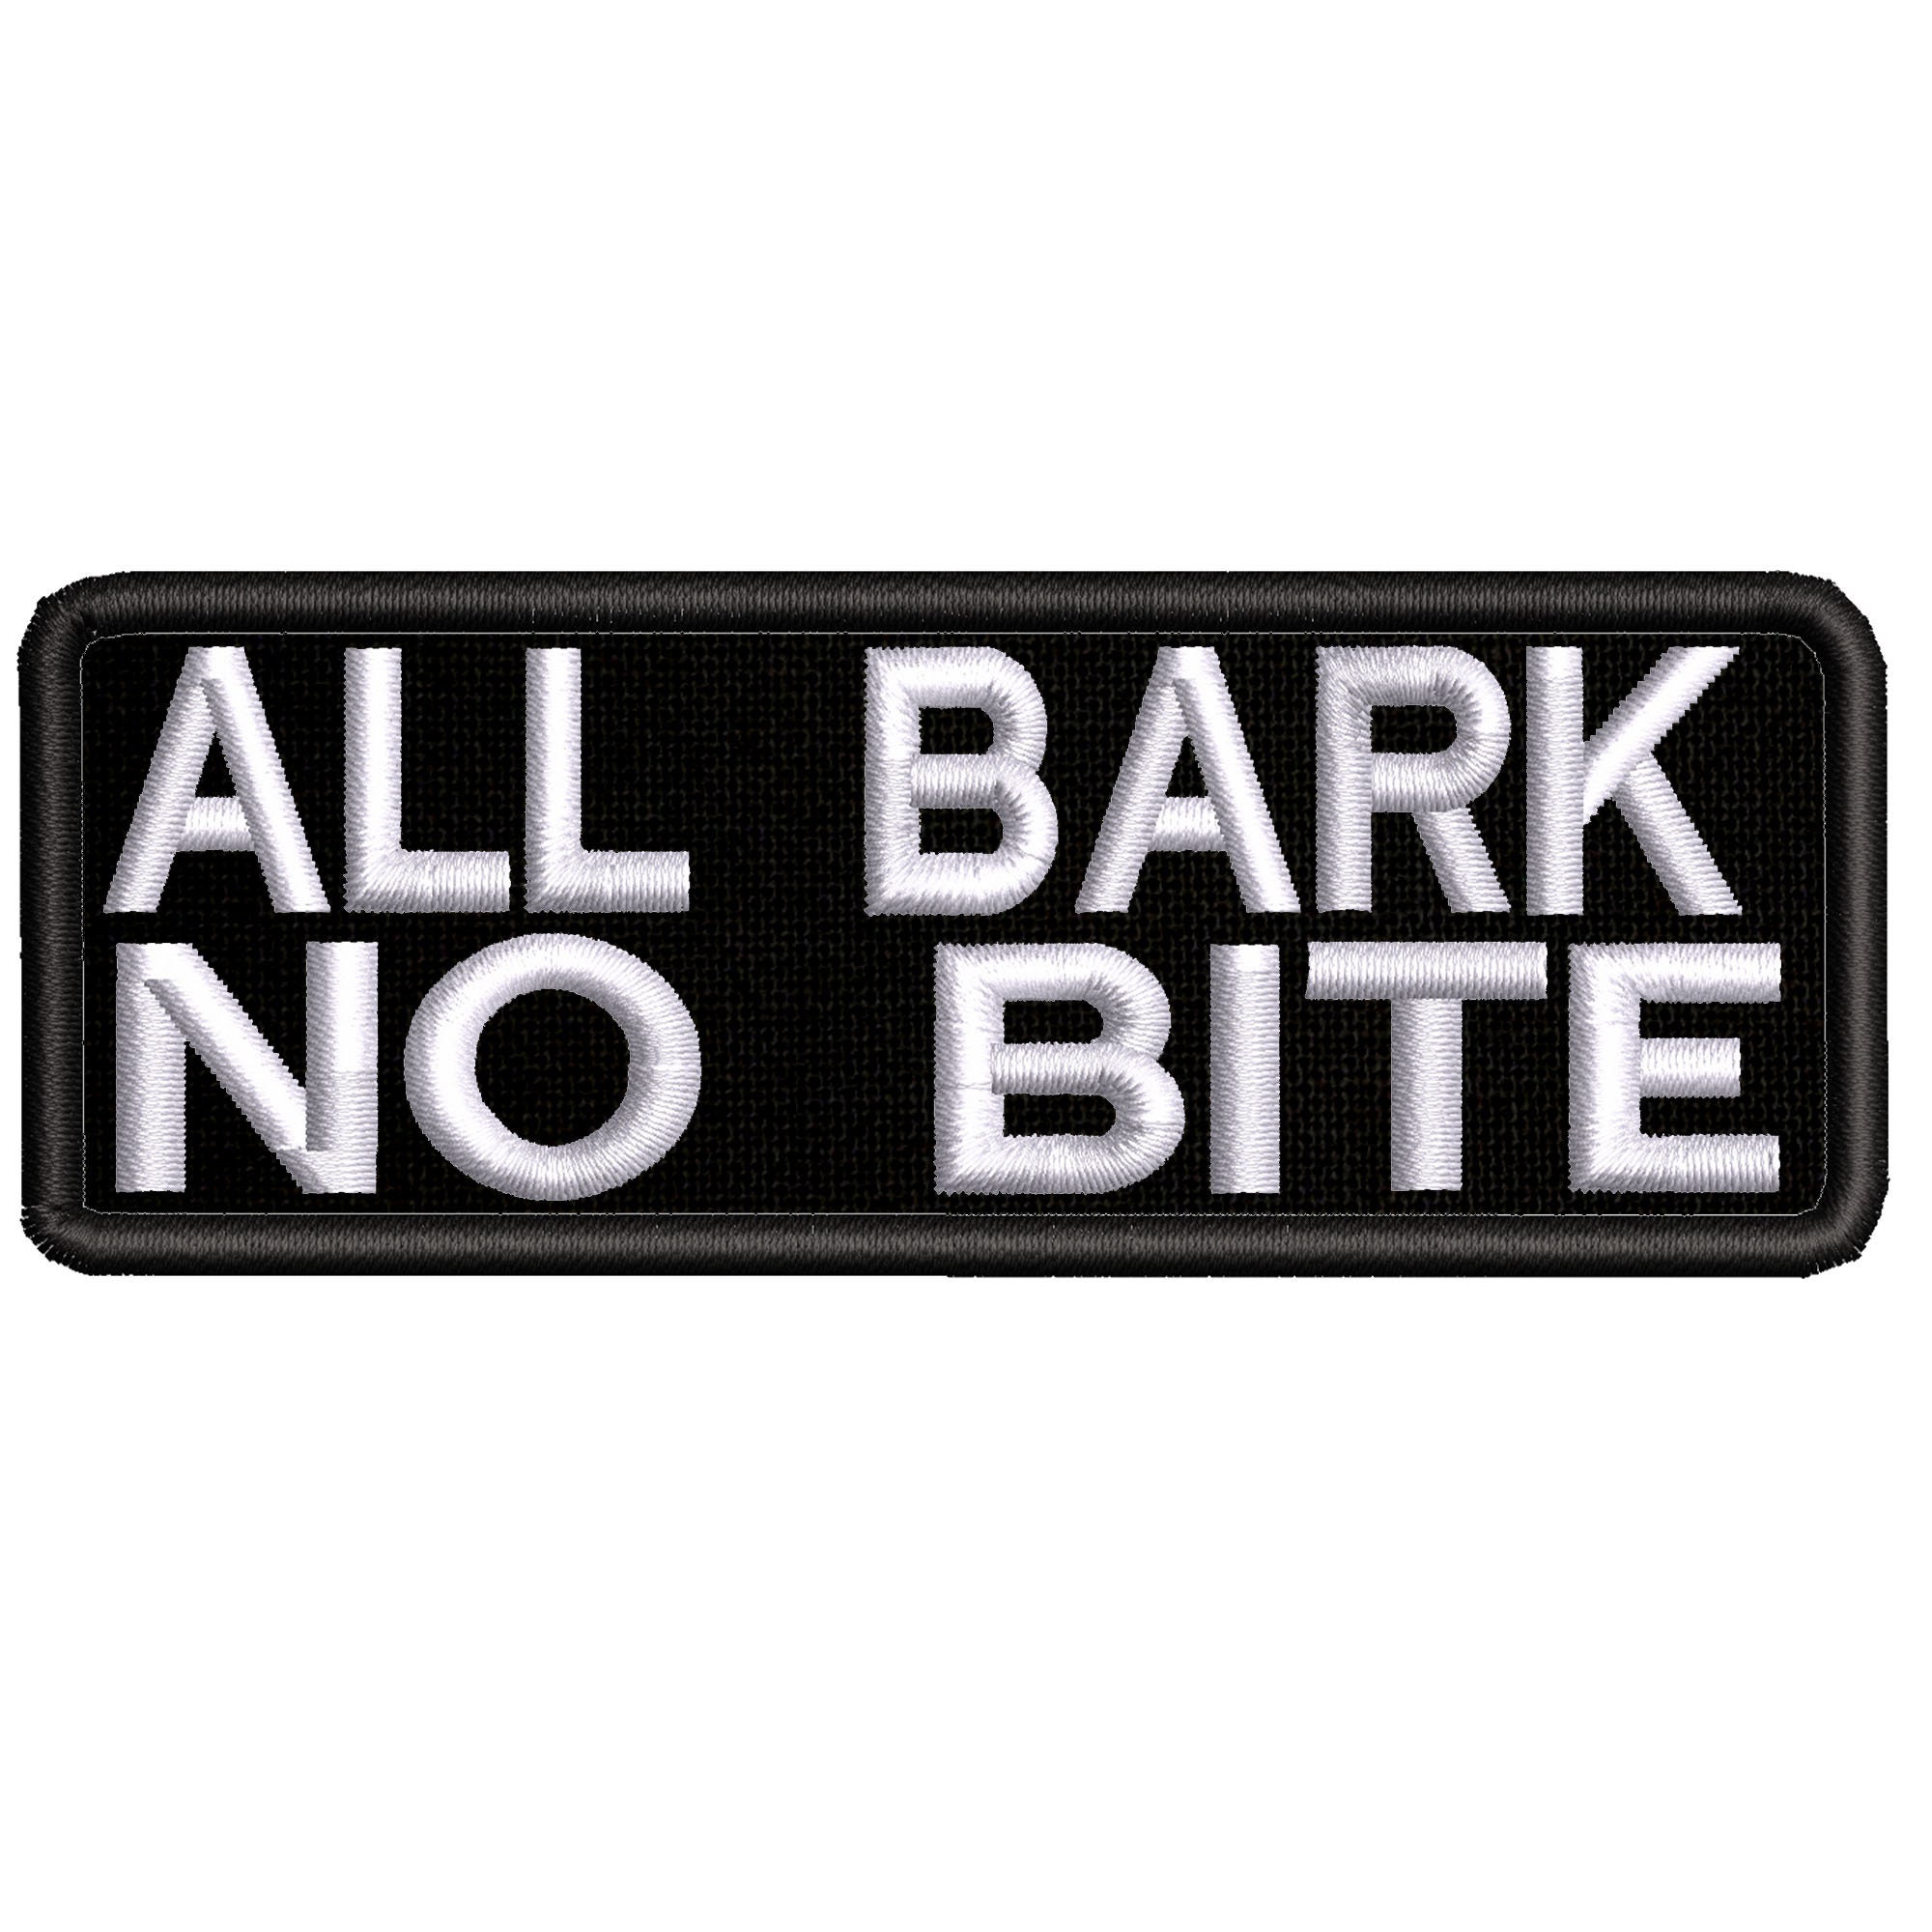 All Bark No Bite Embroidered Patch Iron on / Sew on Funny Decorative Custom  Badge Name Tag for Vest Jacket Bag Backpack Clothing 